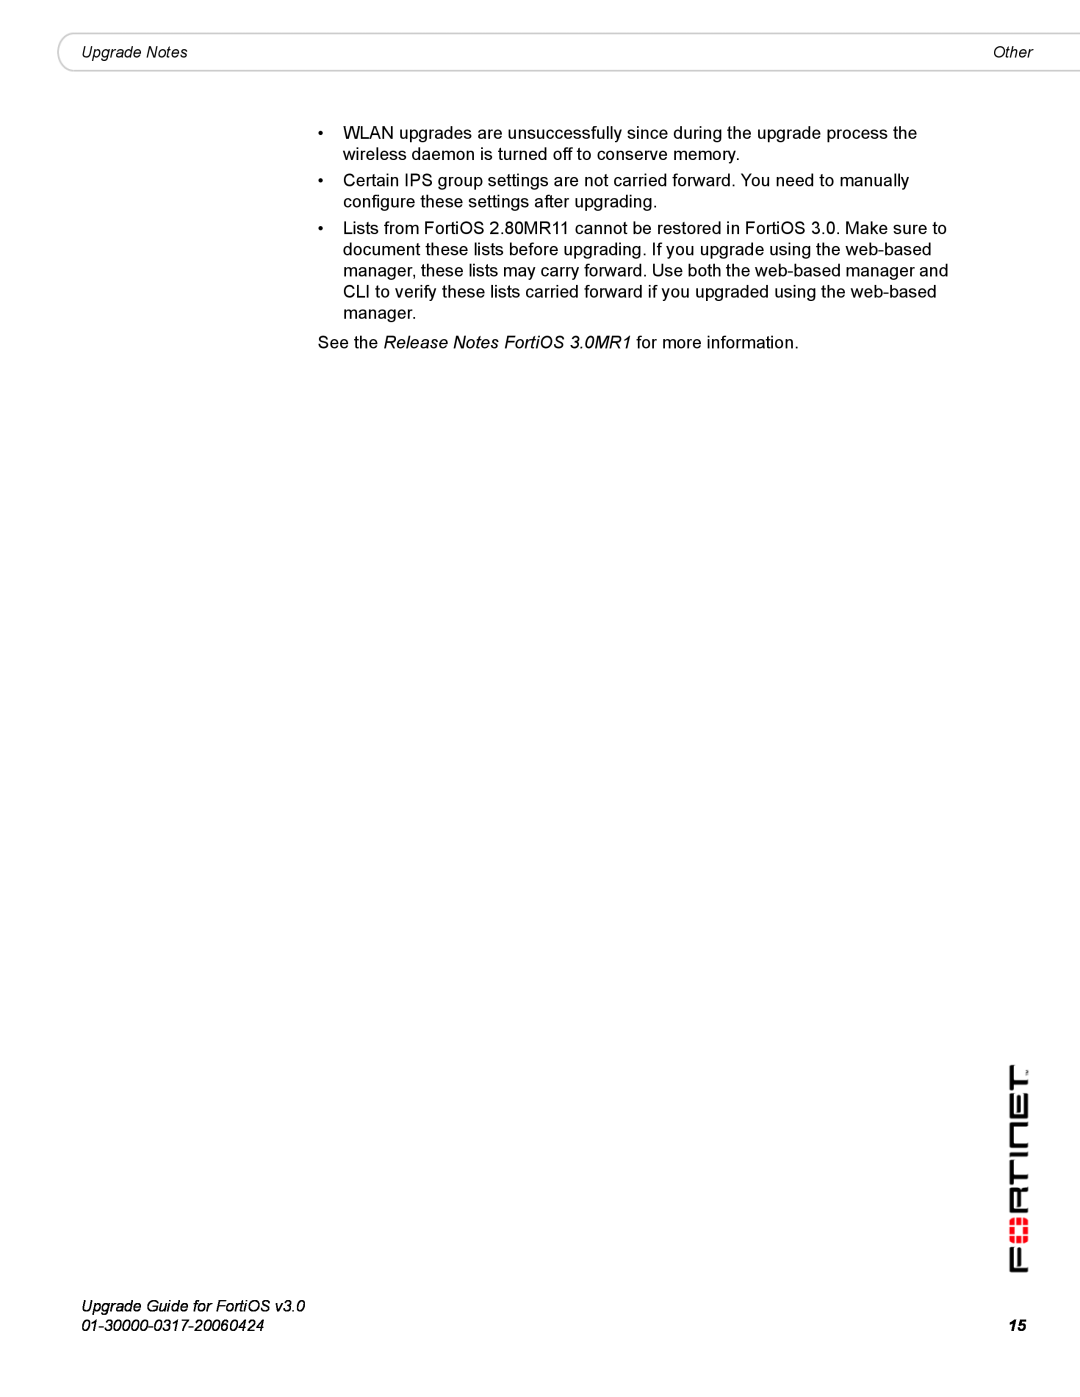 Fortinet manual See the Release Notes FortiOS 3.0MR1 for more information 